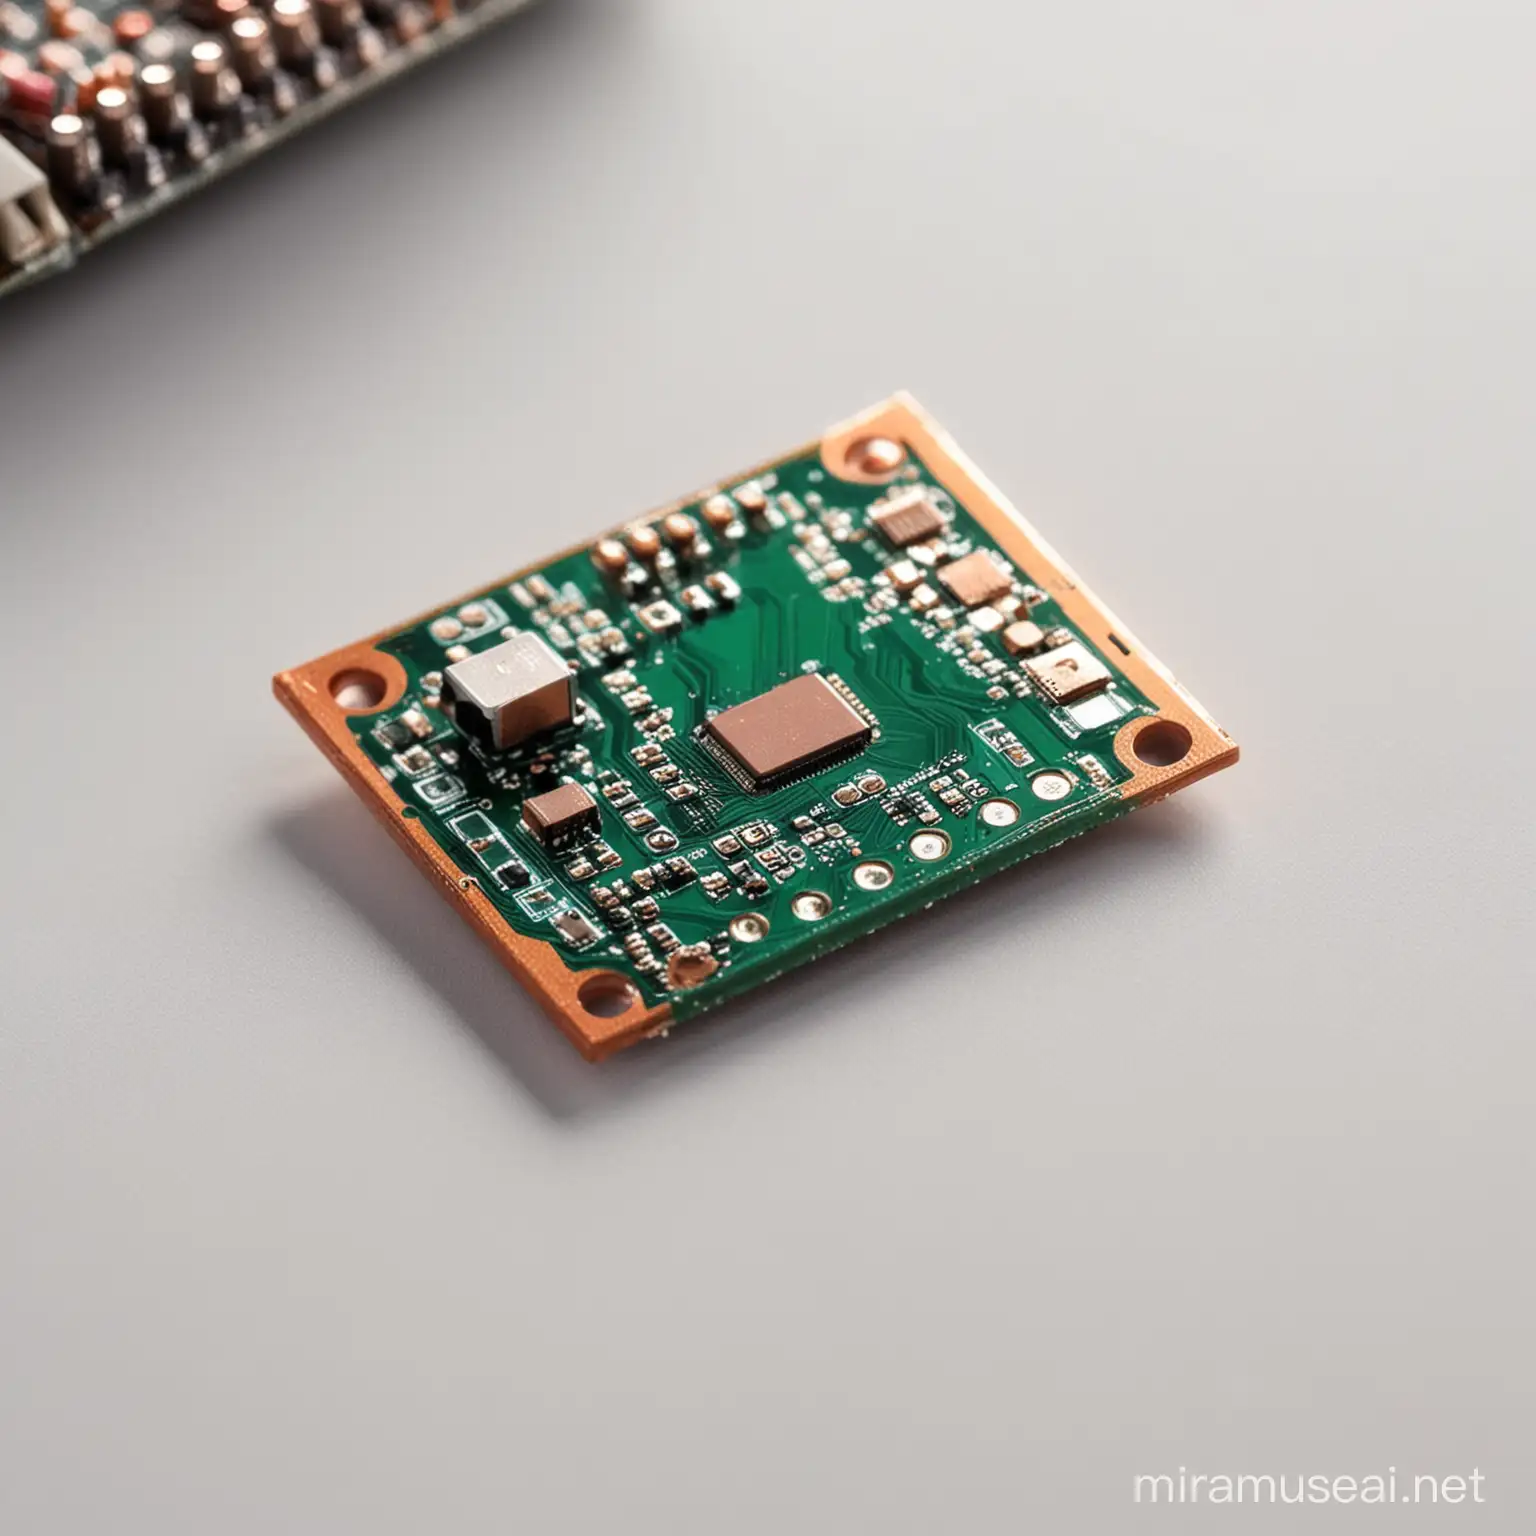 electrical small PCB board on a white background at a beautiful angle with backlight shiny copper